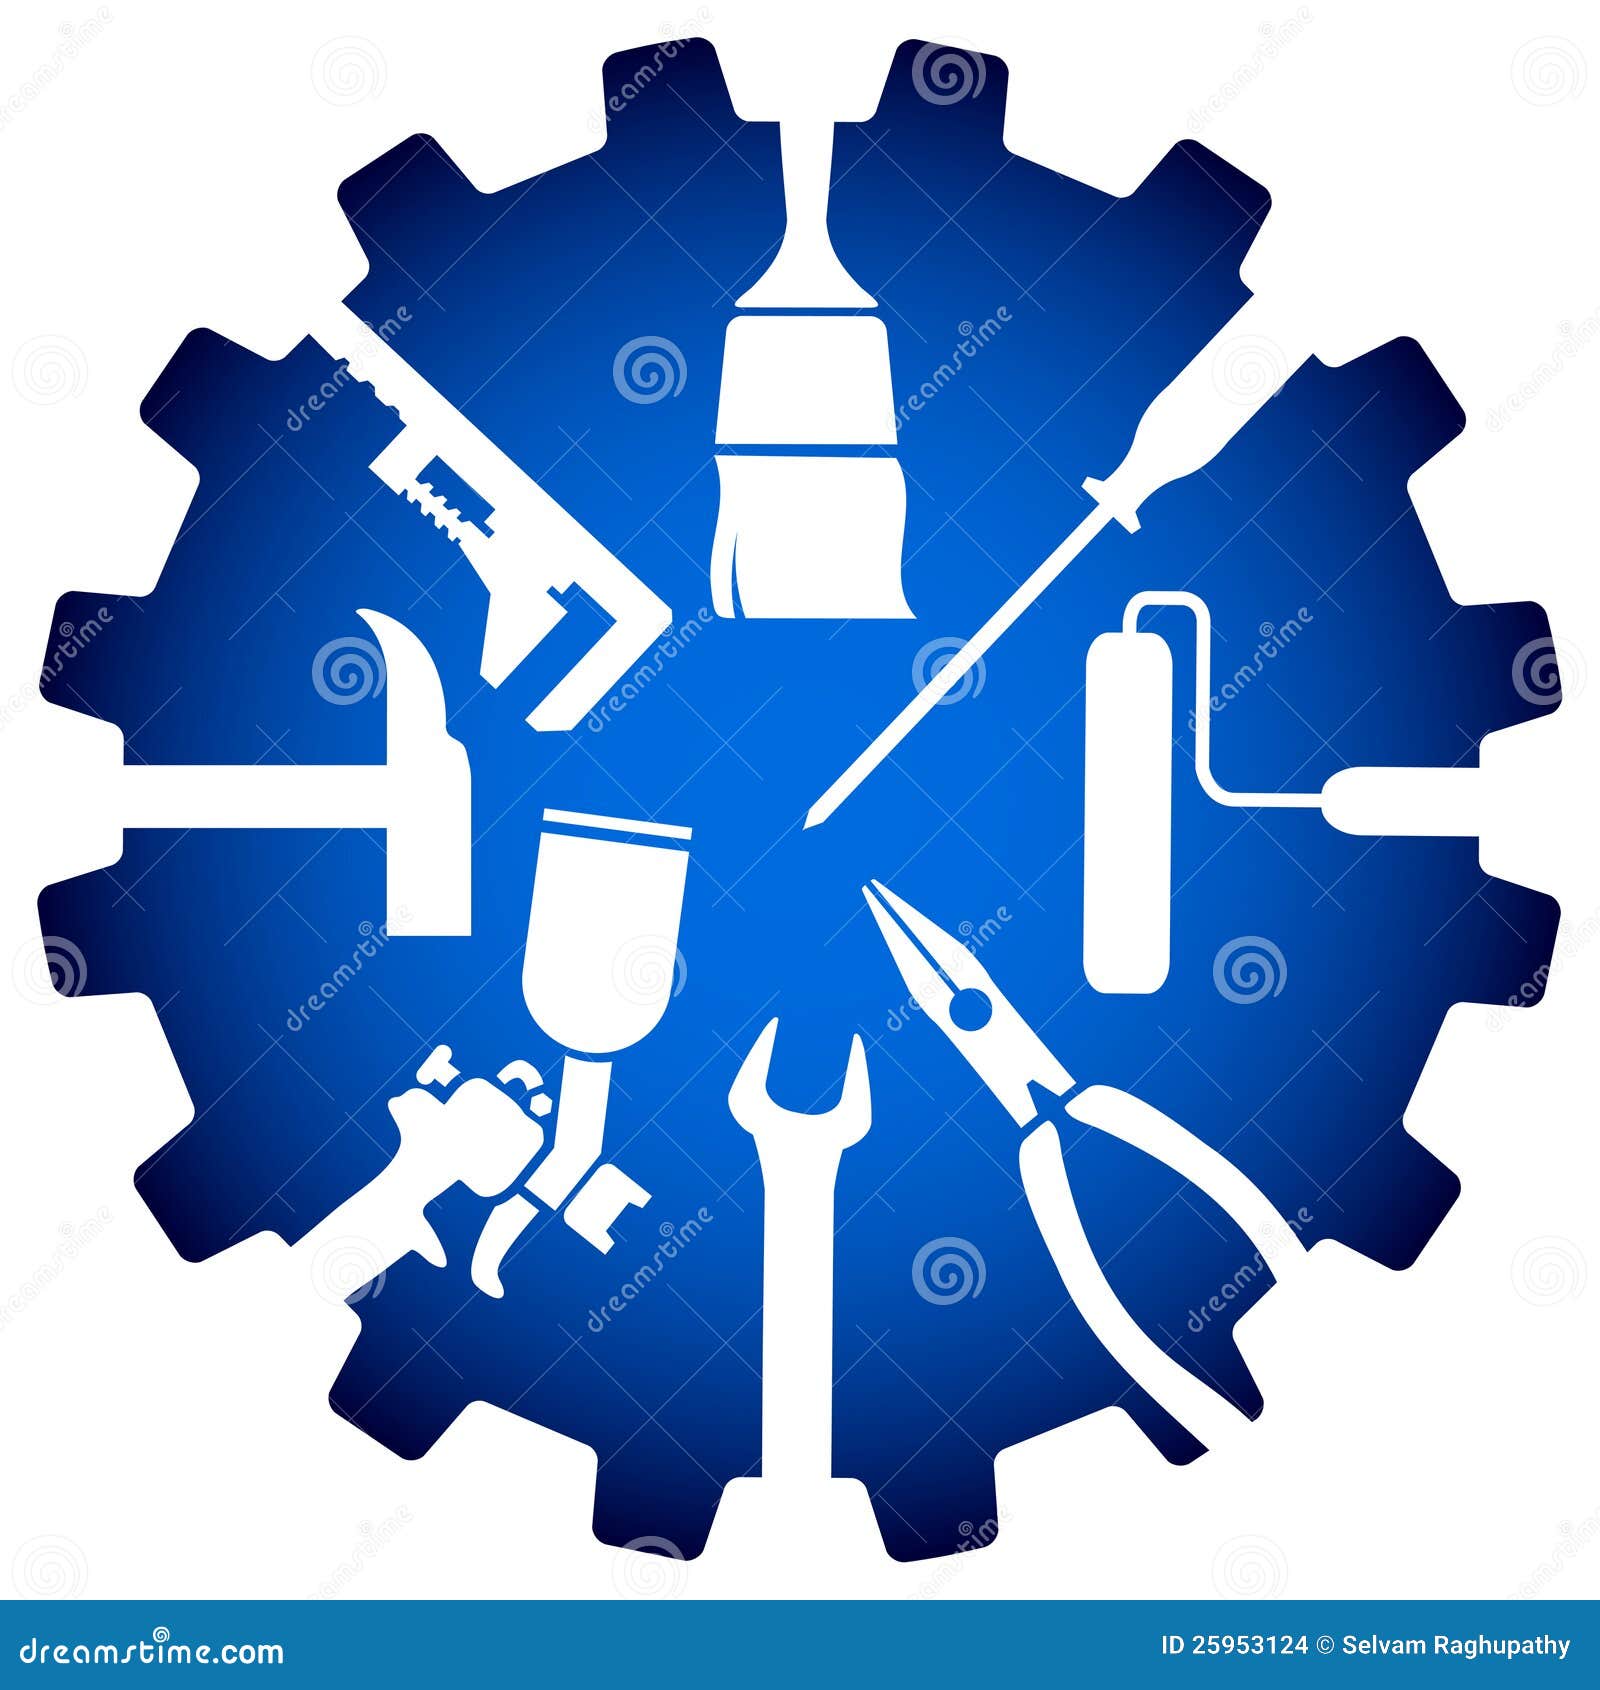 House repair logo stock vector. Illustration of contractor - 25953124